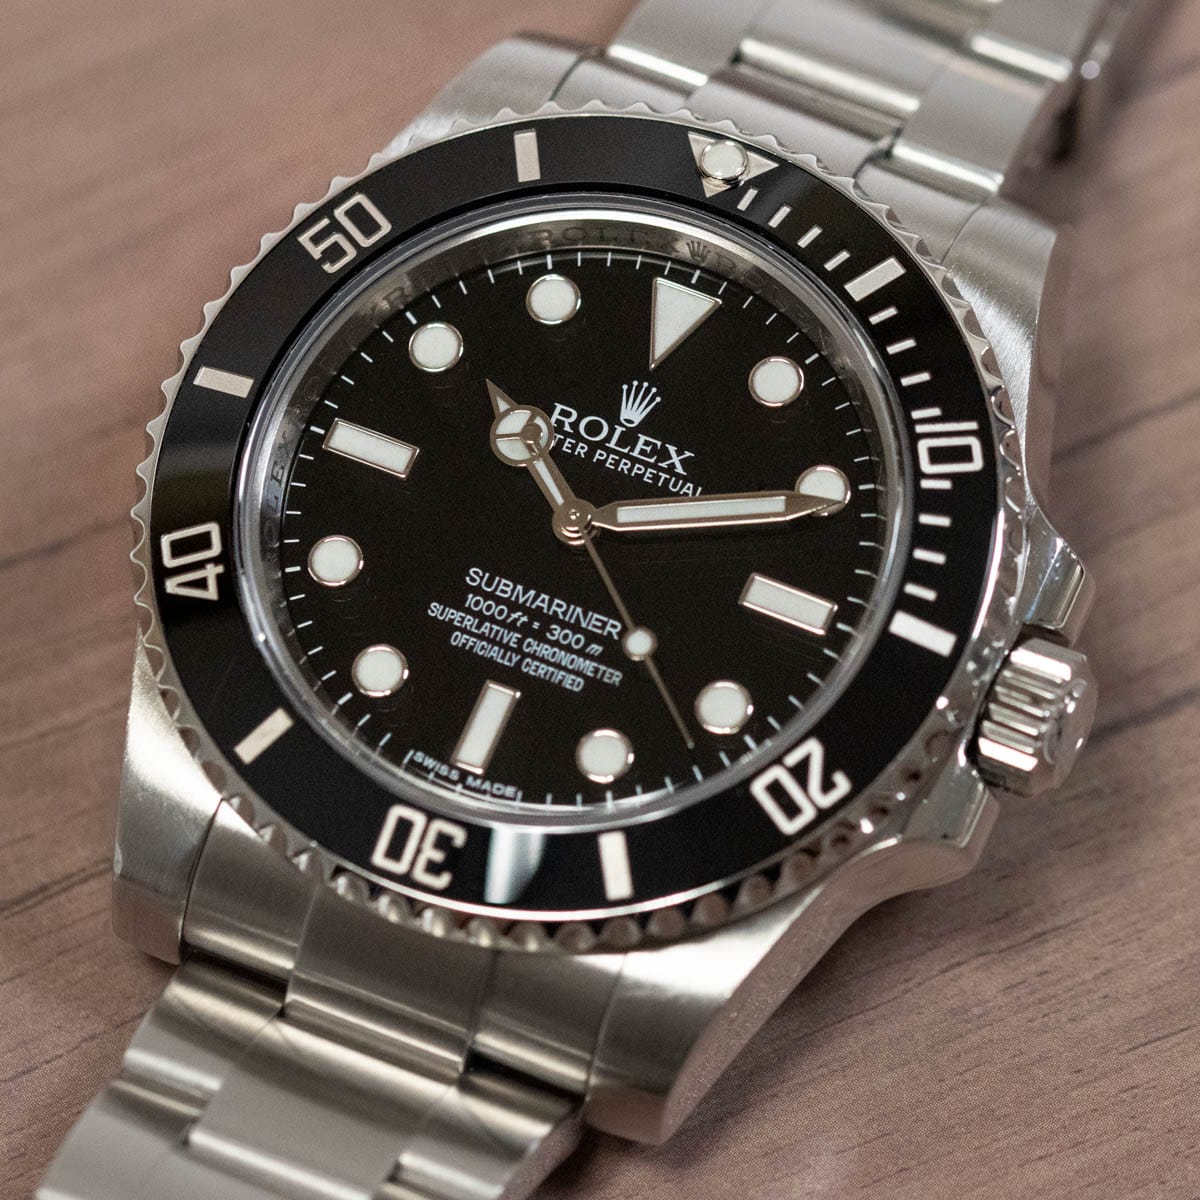 Stylied photo of  of Submariner